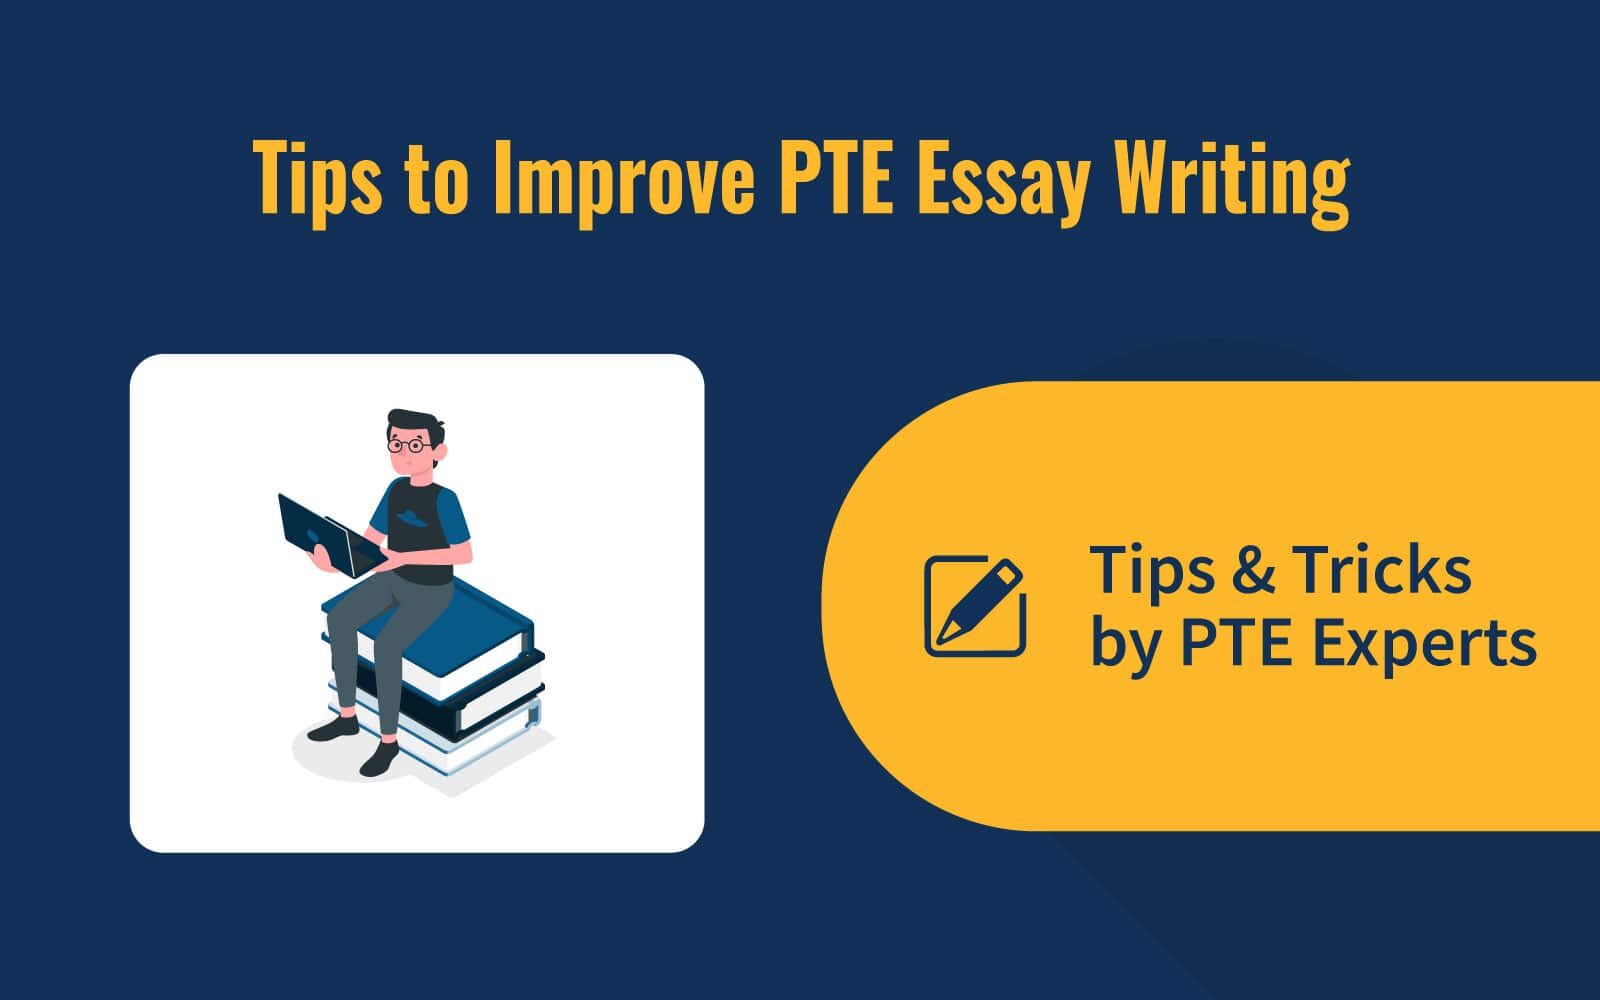 Tips to Improve PTE Essay Writing image